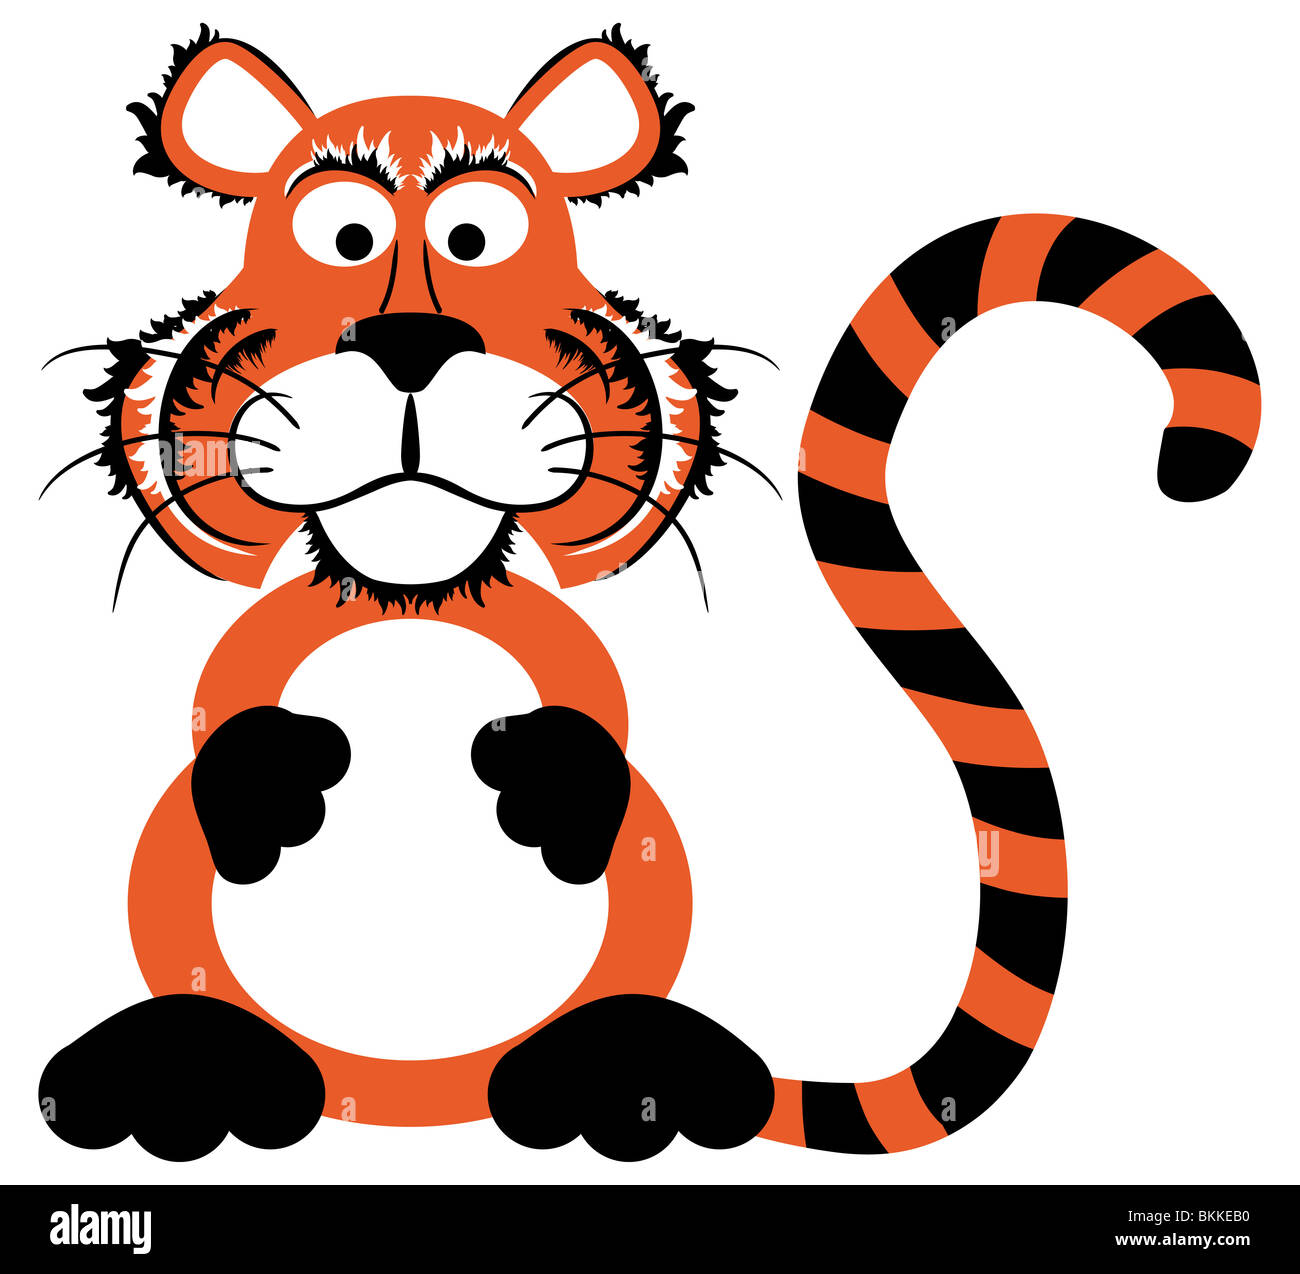 cute cartoon tiger with stripes looking at you Stock Photo - Alamy